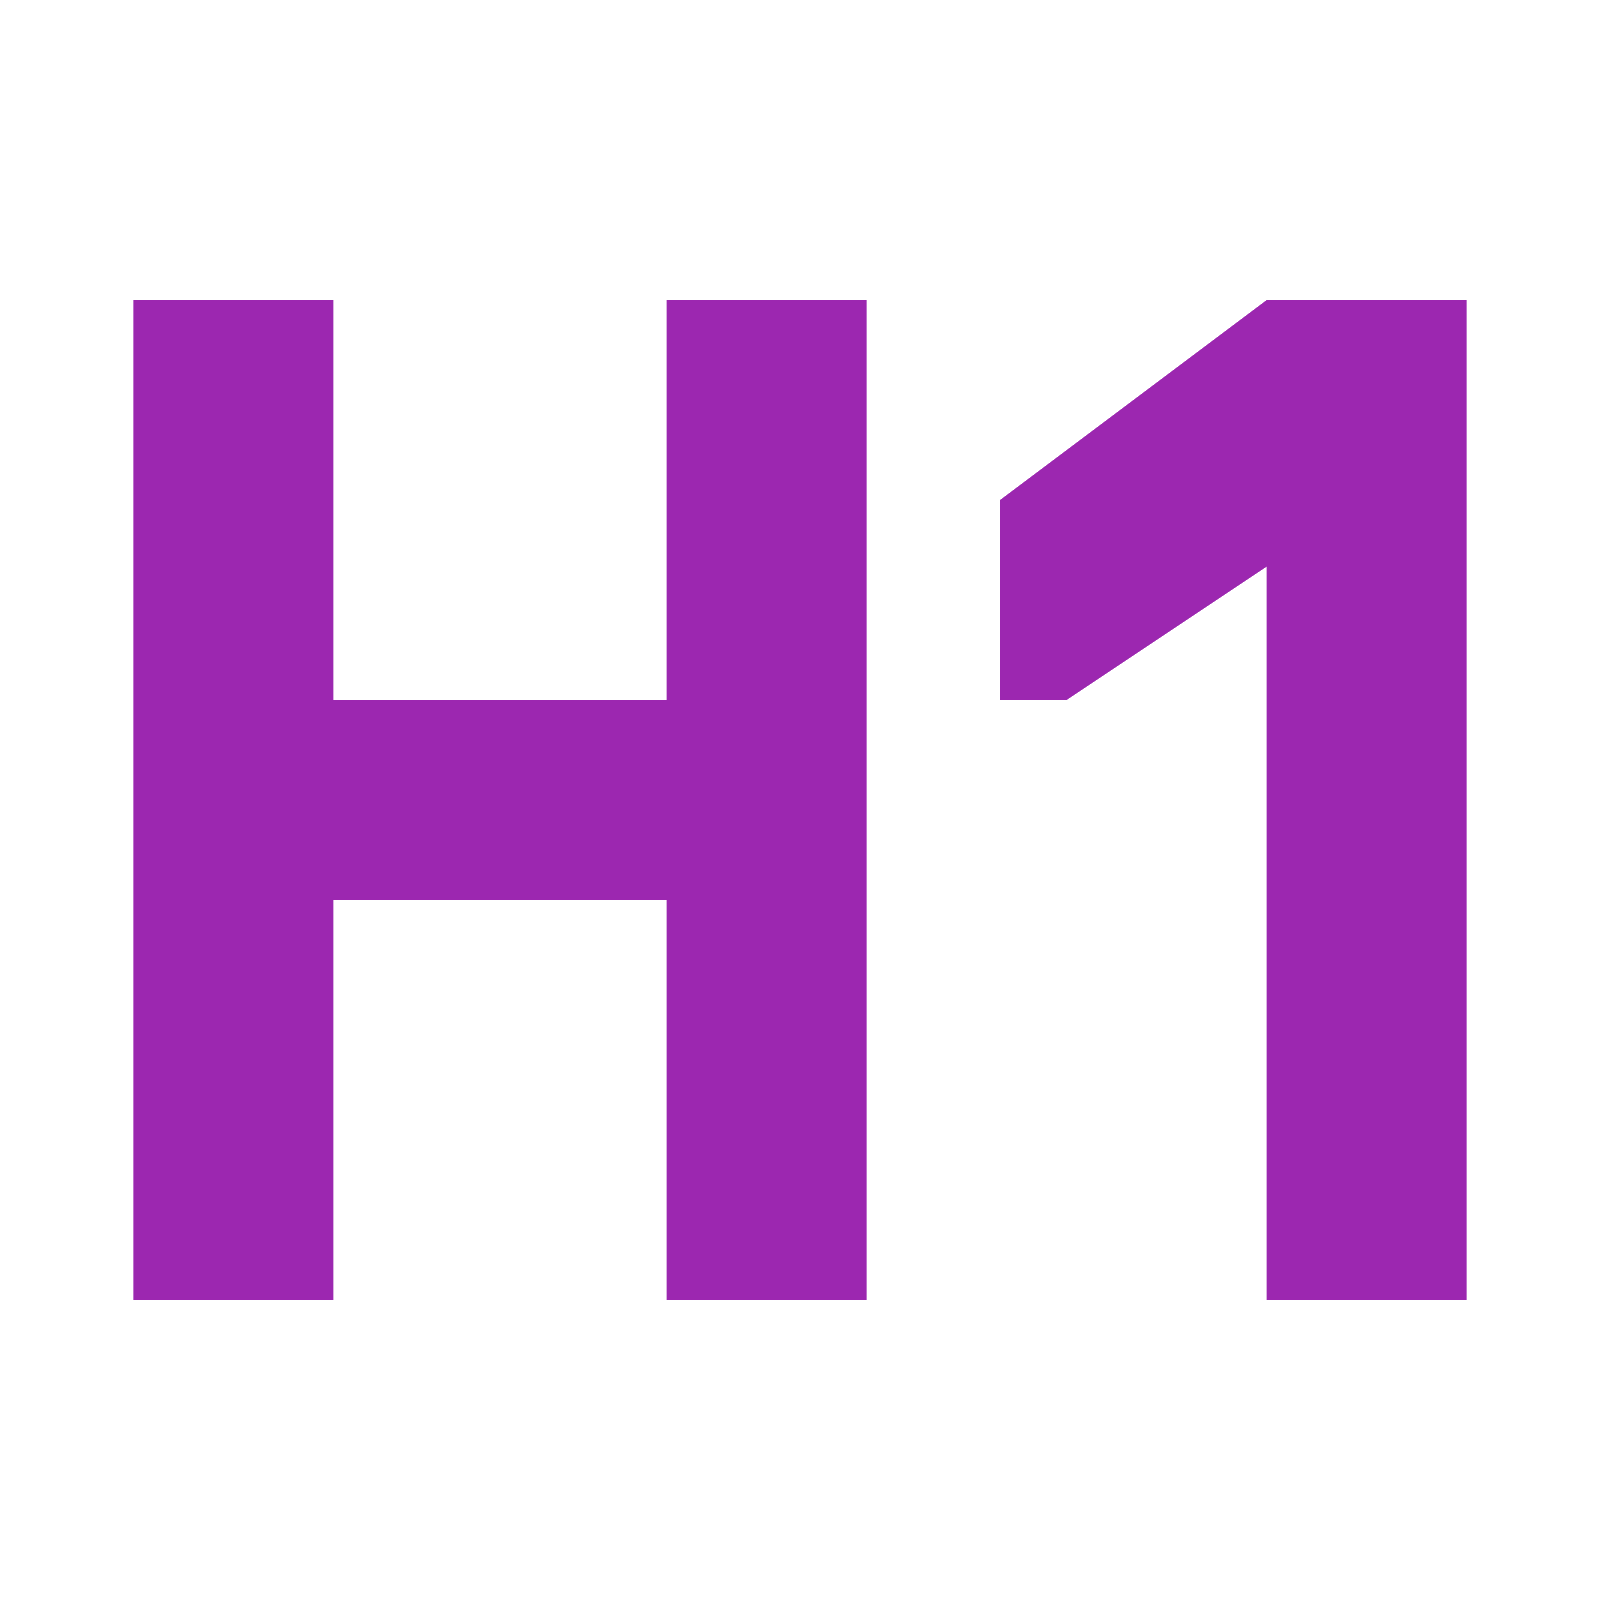 The h1 tag